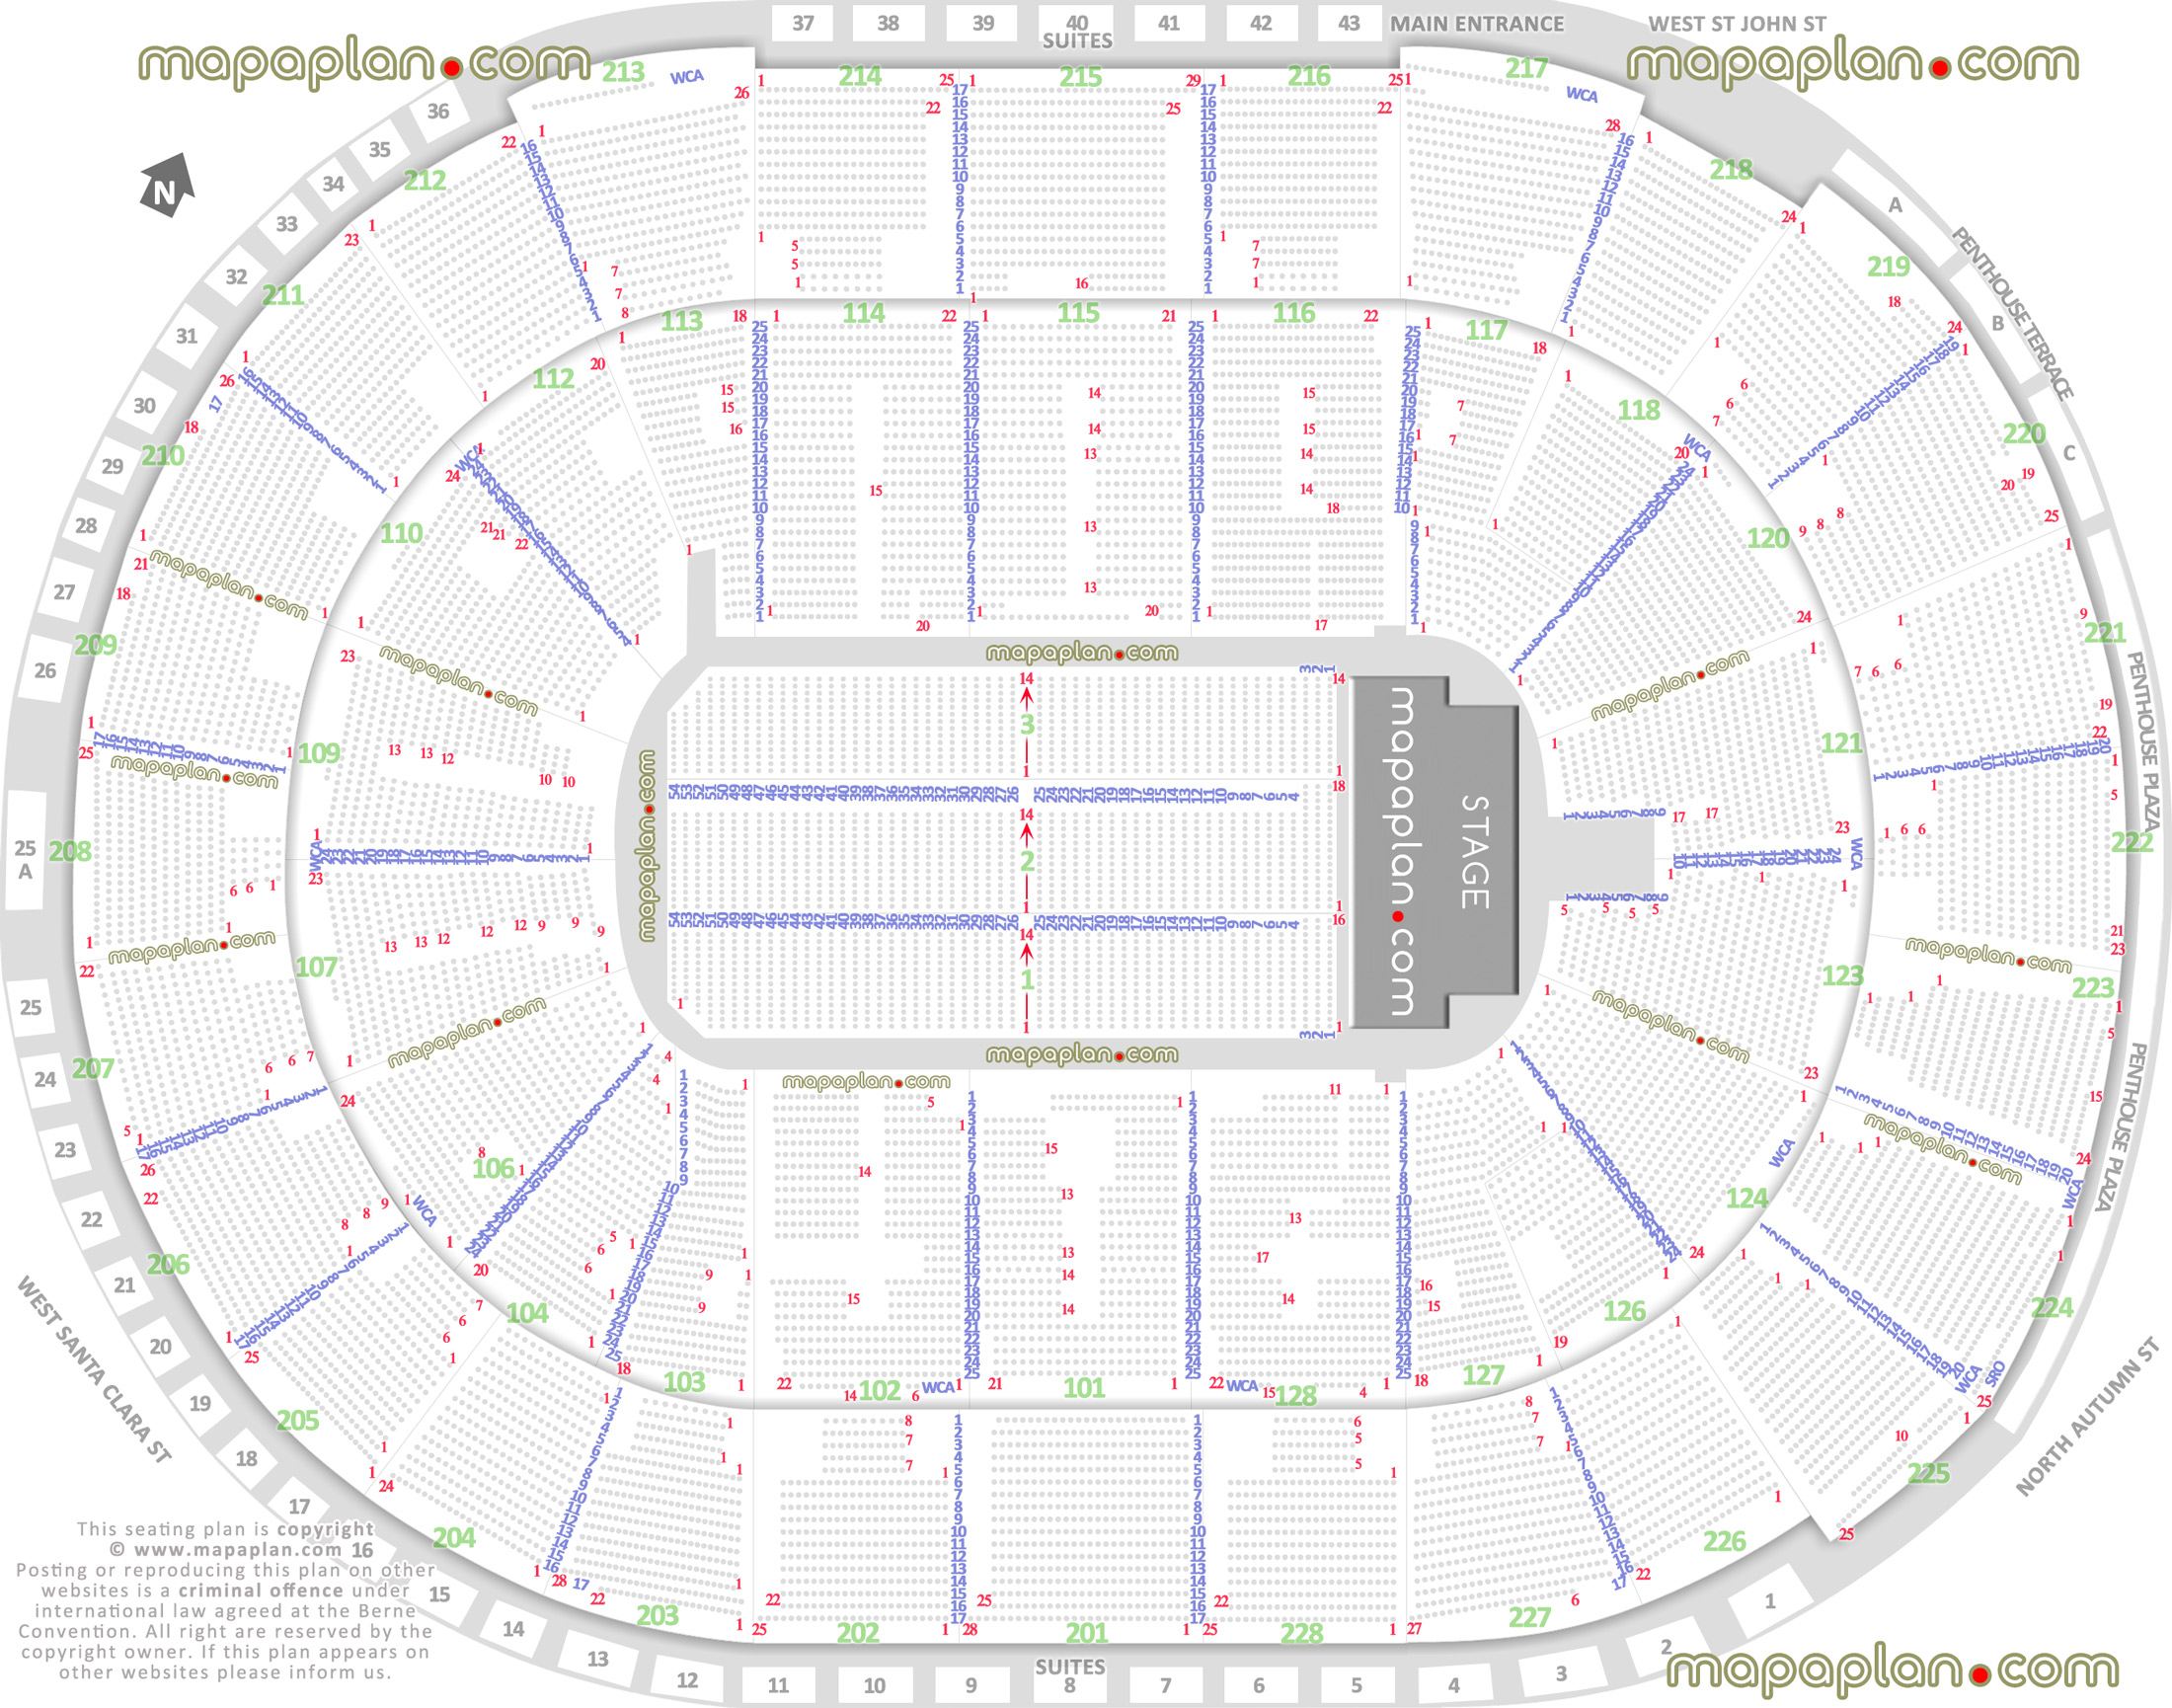 SAP Center Detailed seat & row numbers end stage concert sections